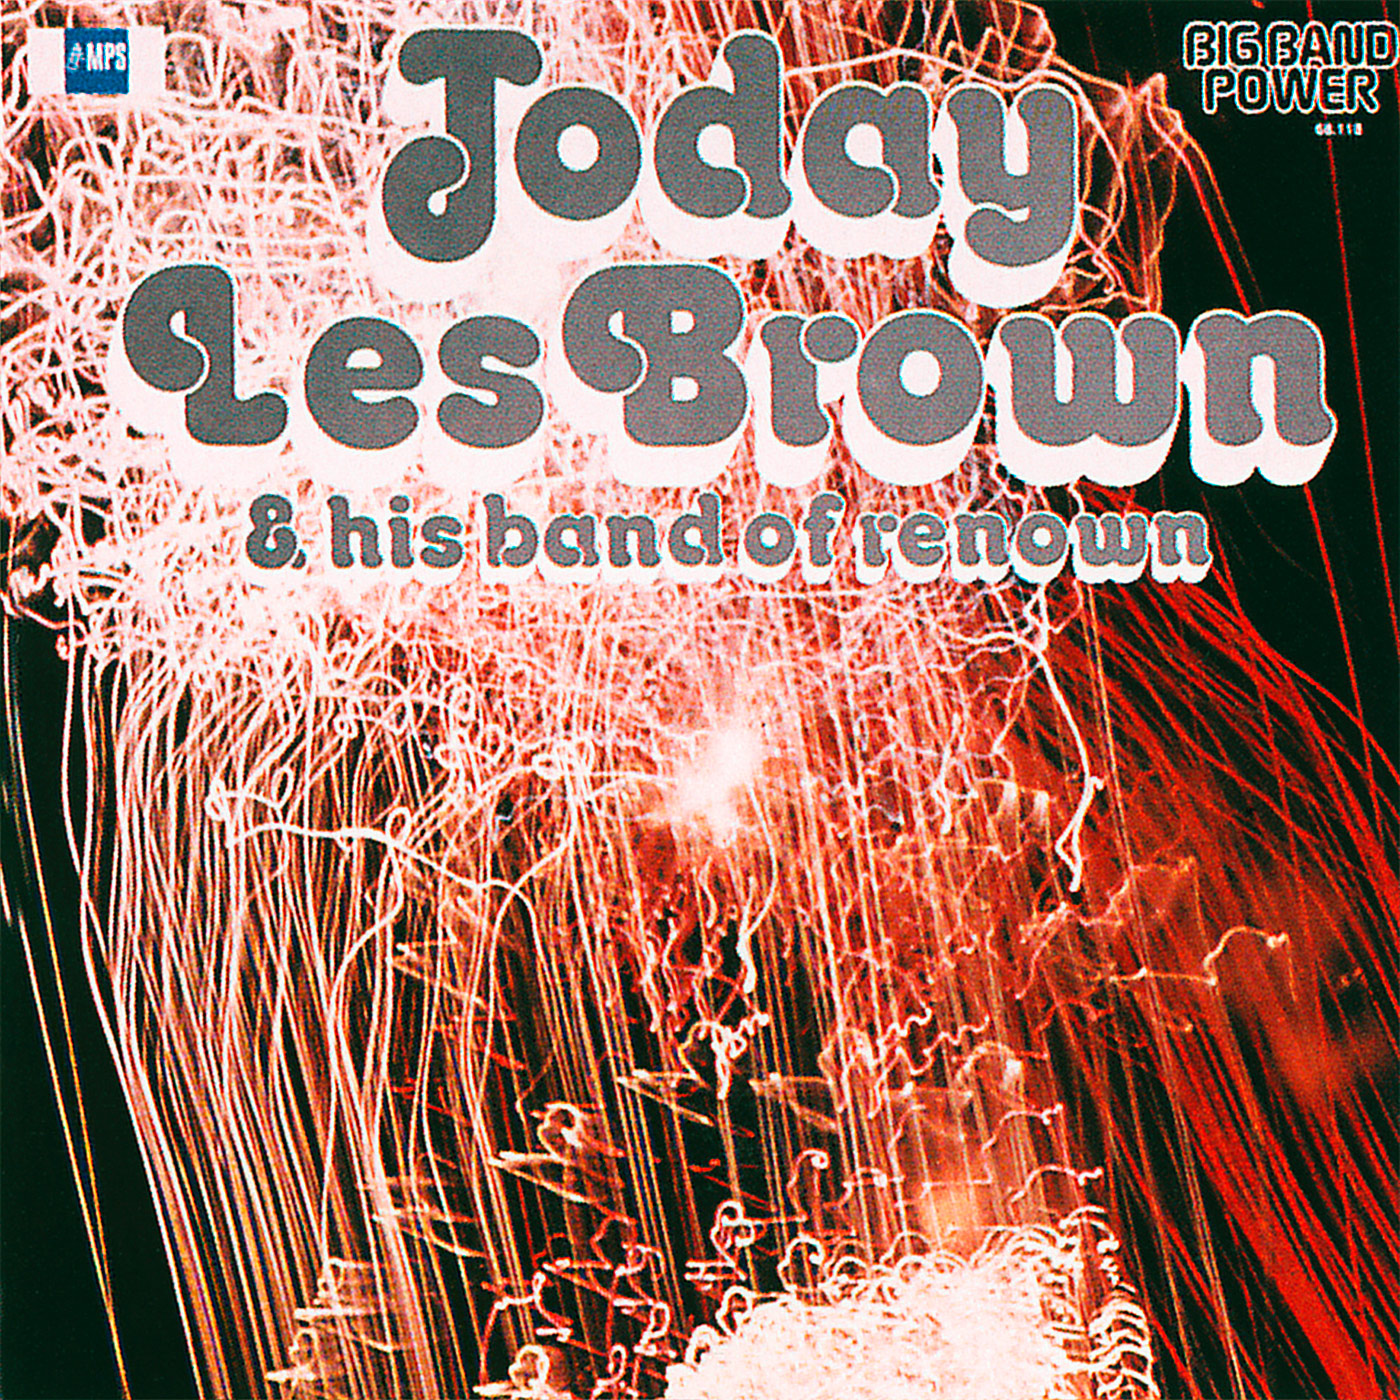 Les Brown & His Band Of Renown – Today (1976/2015) [e-Onkyo FLAC 24bit/88,2kHz]